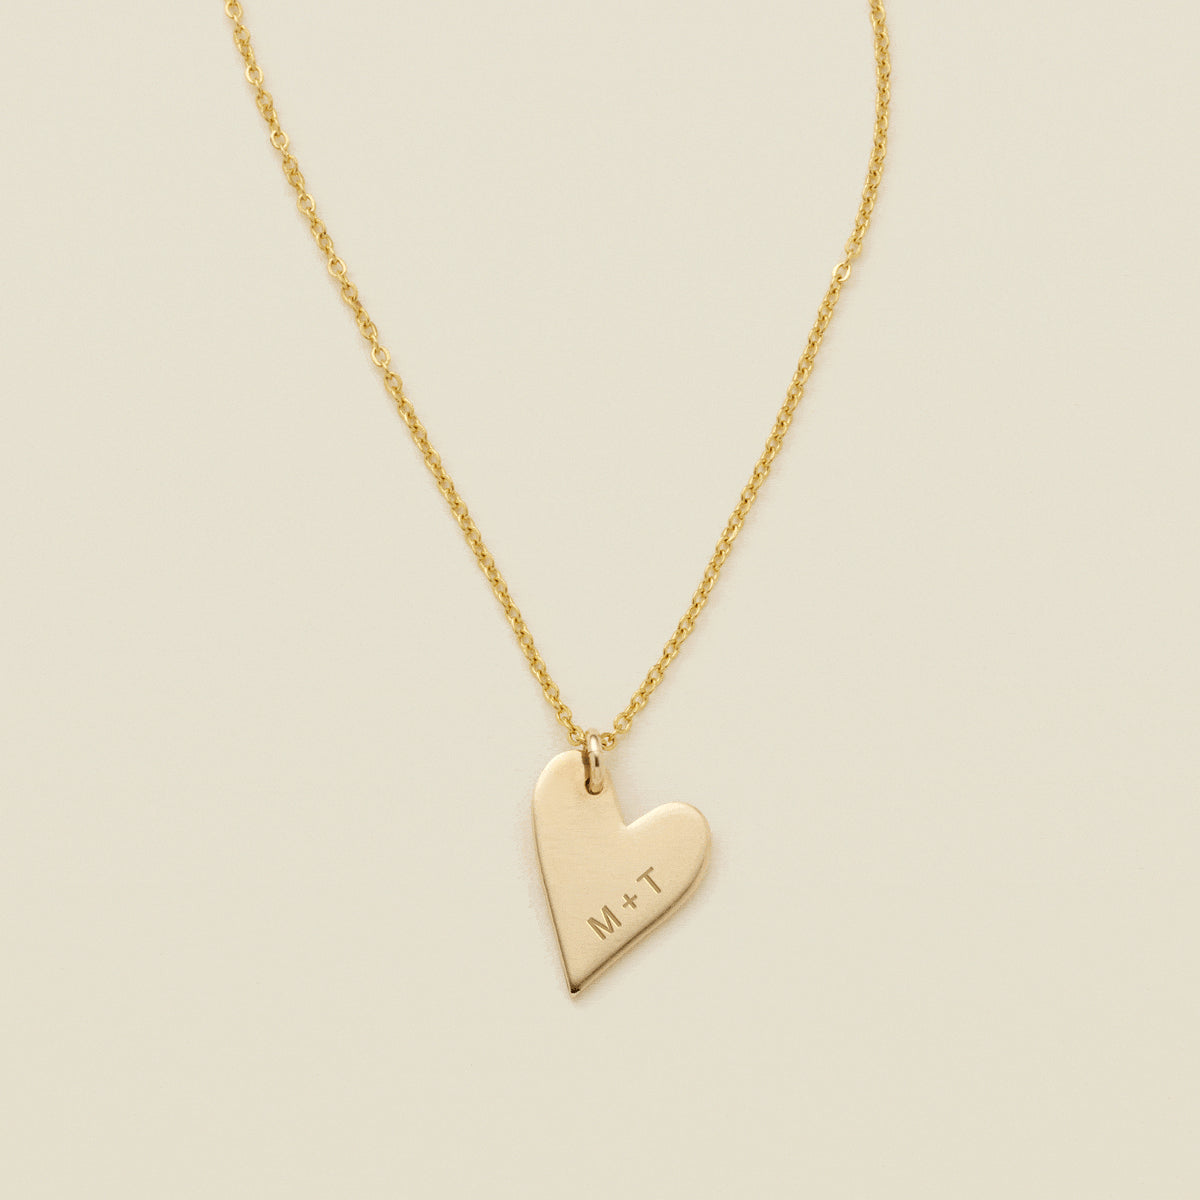 Sweetheart Love Necklace